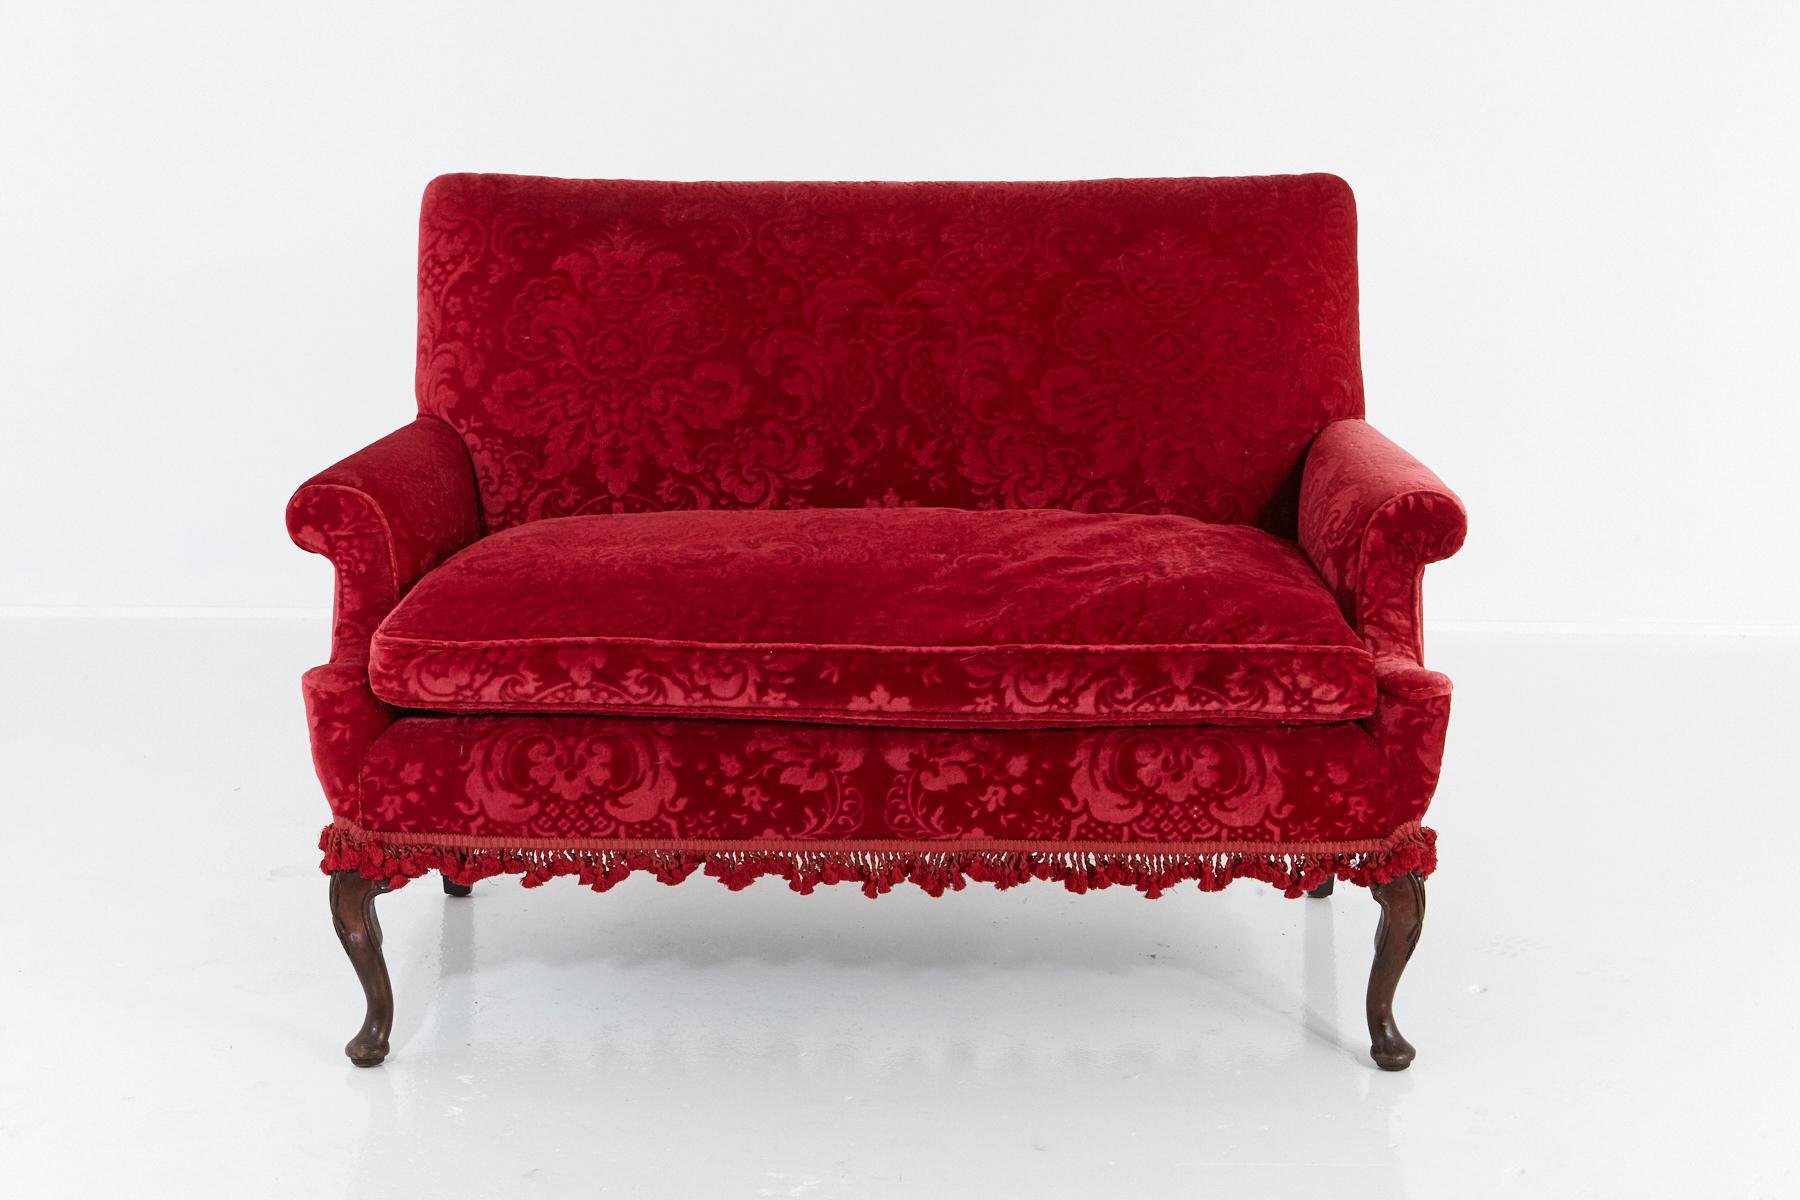 Late 19th century Victorian two-seat sofa with scrolled arms, a red embossed mohair upholstery with an ornamental acanthus pattern and a decorative tassel bordure, mounted on capriole legs.
The sofa is in a very good condition, very comfortable and